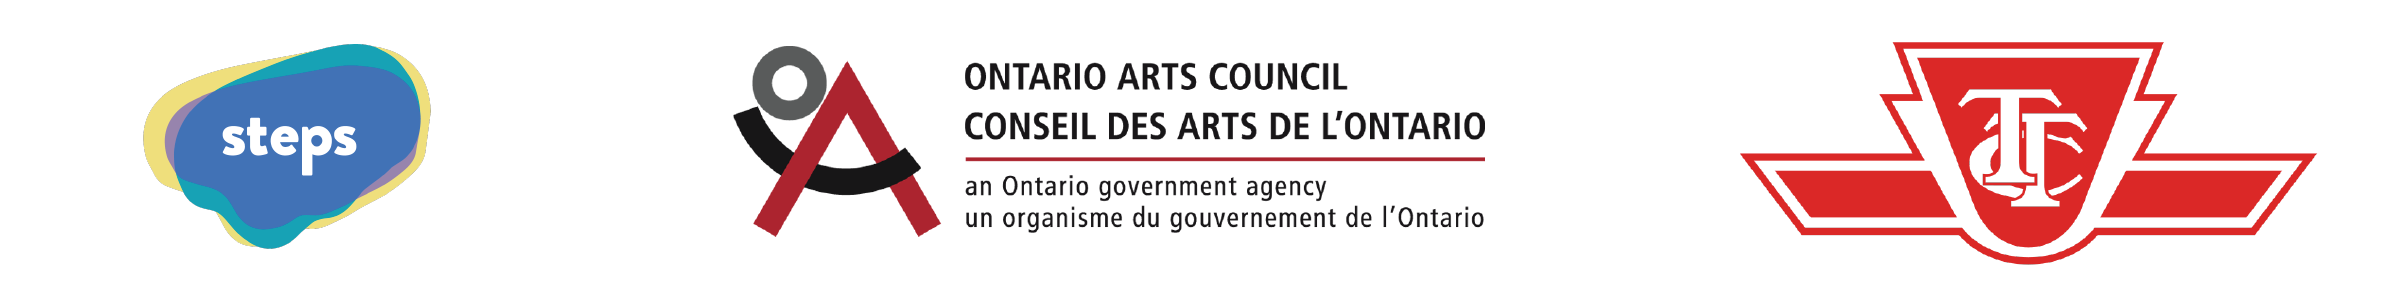 Logos for STEPS, TTC and Ontario Arts Council.